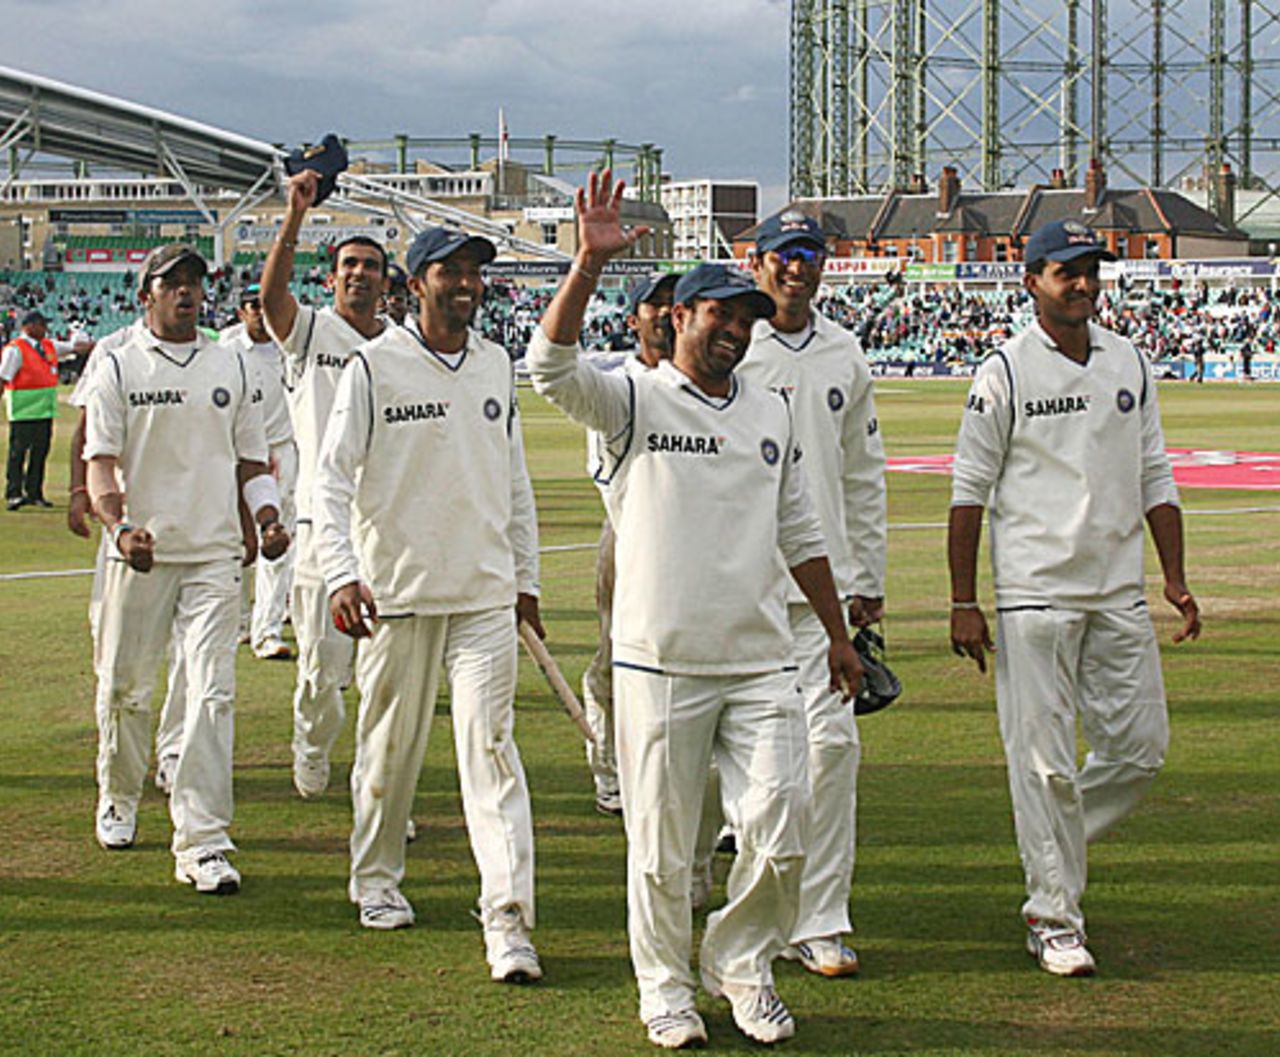 A delighted Sachin Tendulkar leads India off the field at the close. Although the match was drawn, India won the series 1-0, England v India, 3rd Test, The Oval, 5th day, August 13, 2007